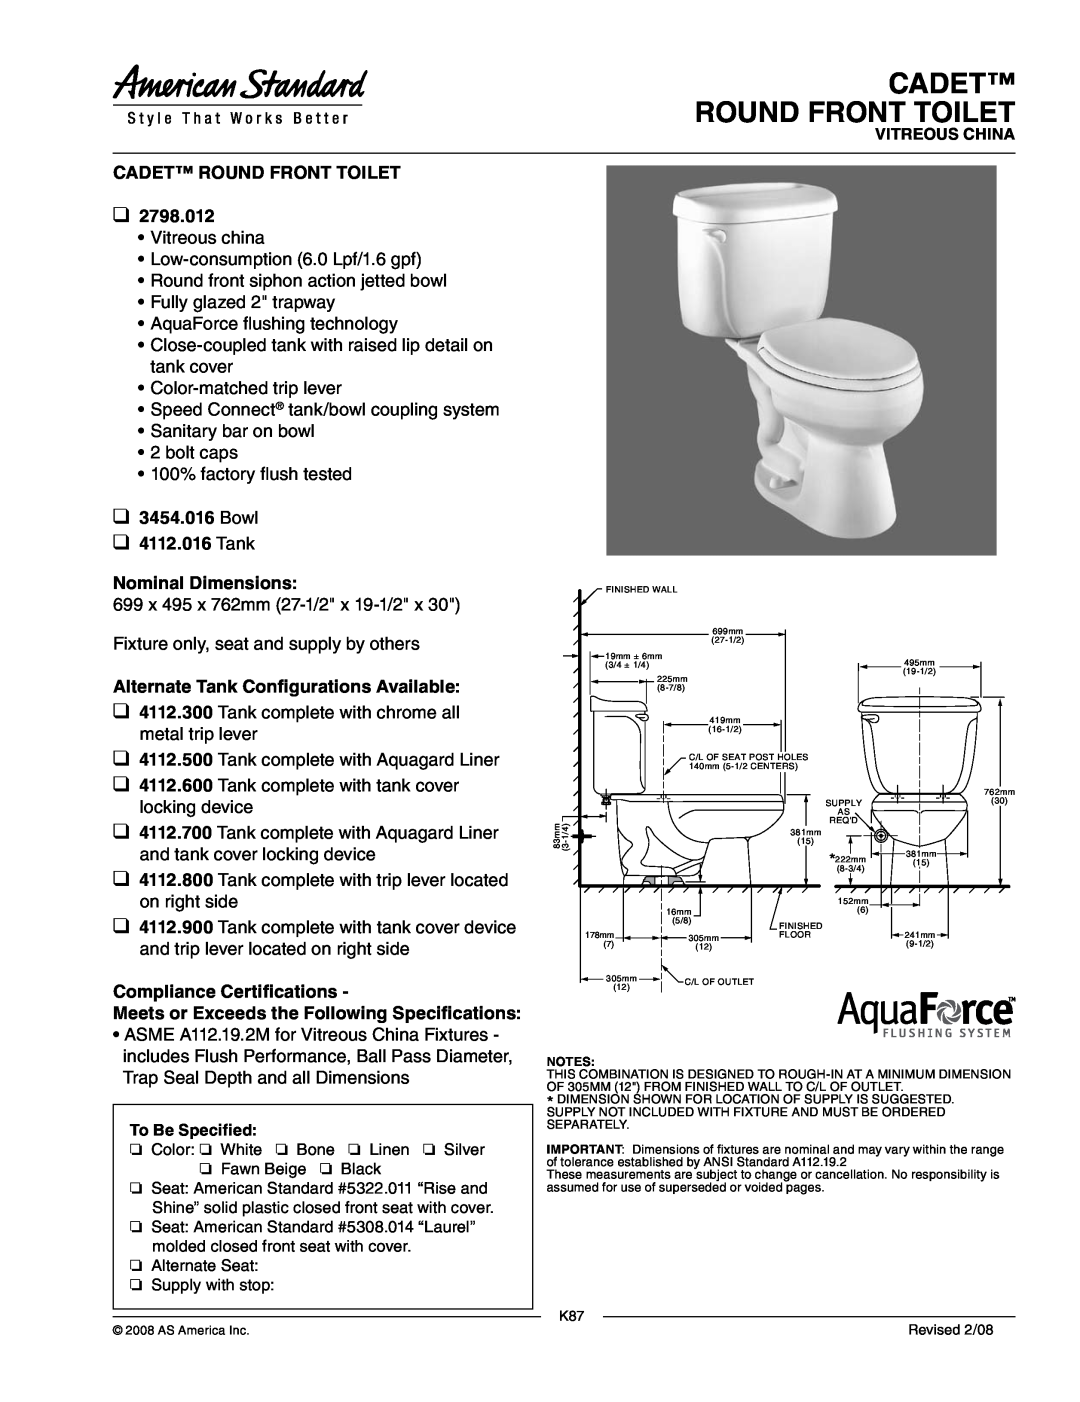 American Standard 2798.012, 3454.016, 4112.800 dimensions Cadet Round Front Toilet, Bowl 4112.016 Tank Nominal Dimensions 